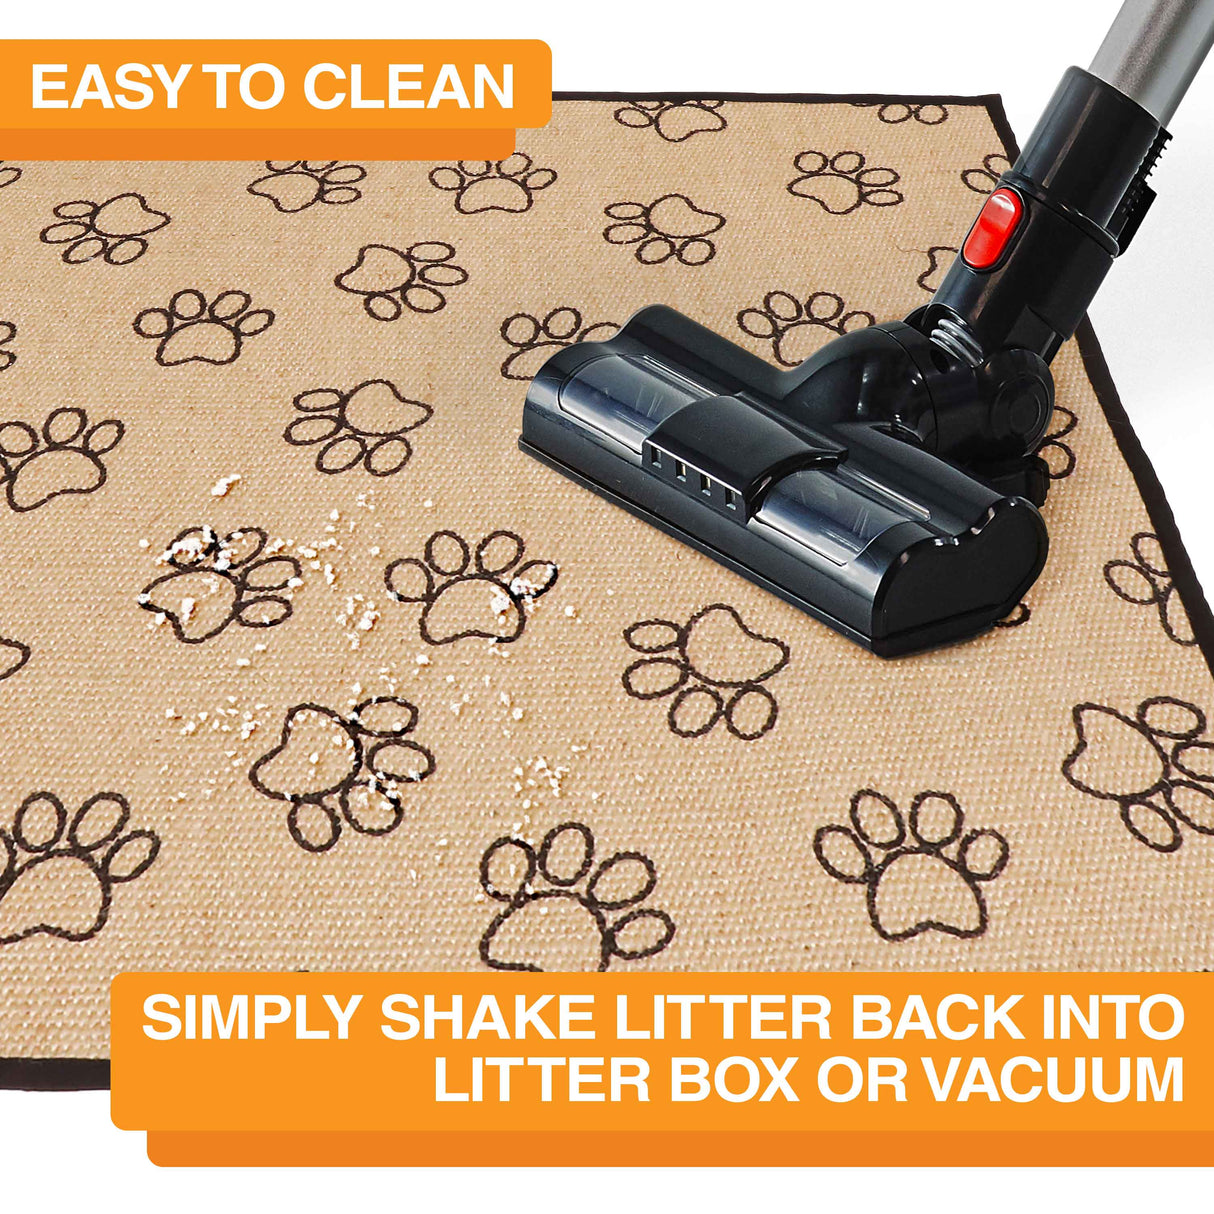 Paw print mat easy to clean